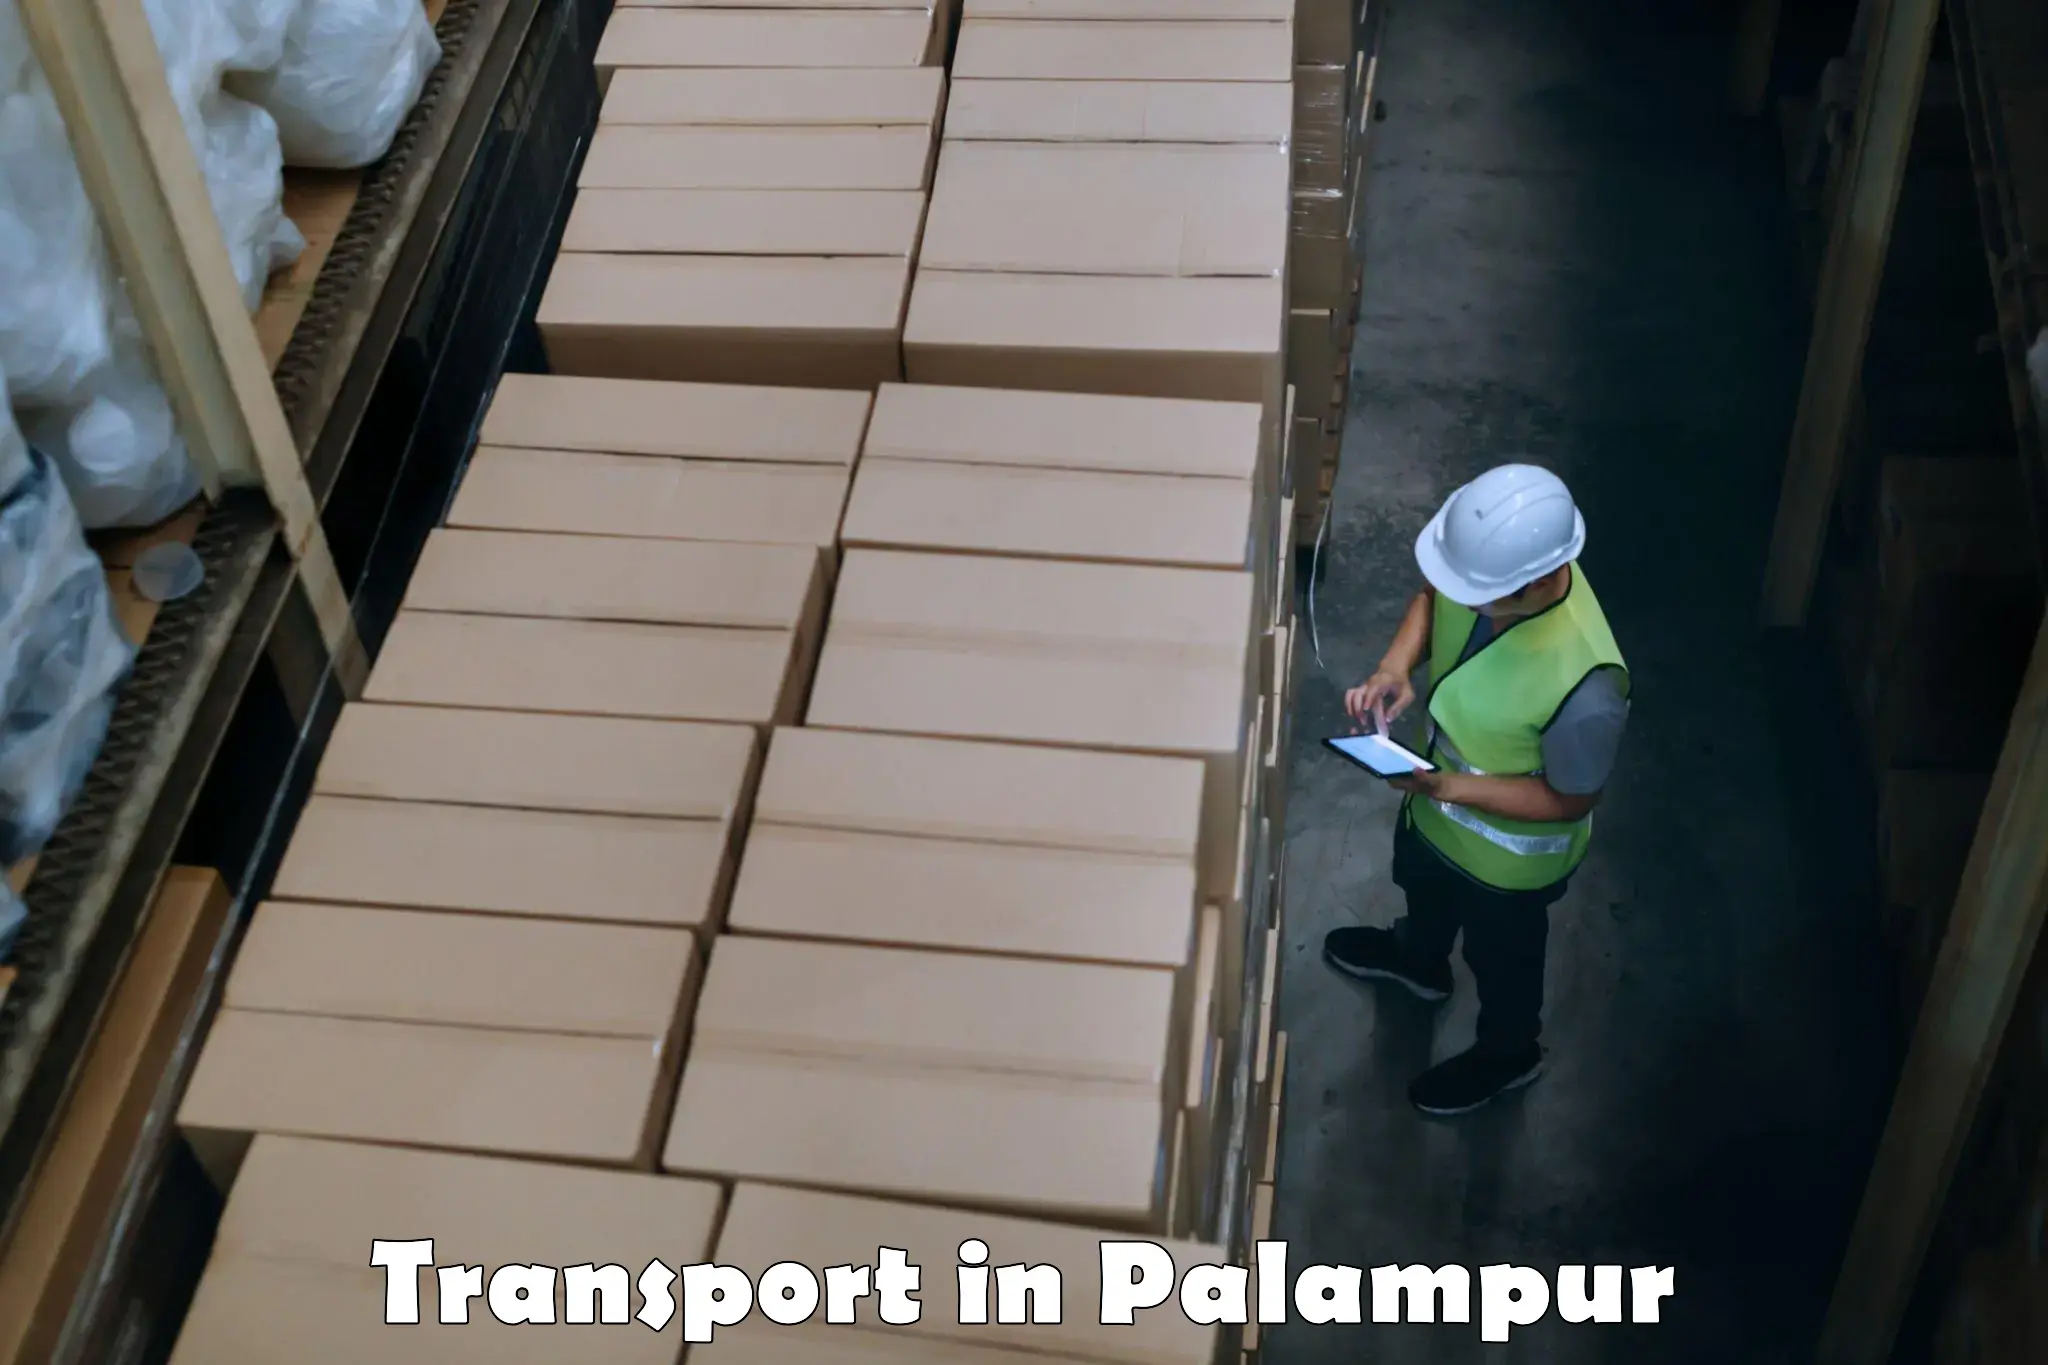 Express transport services in Palampur